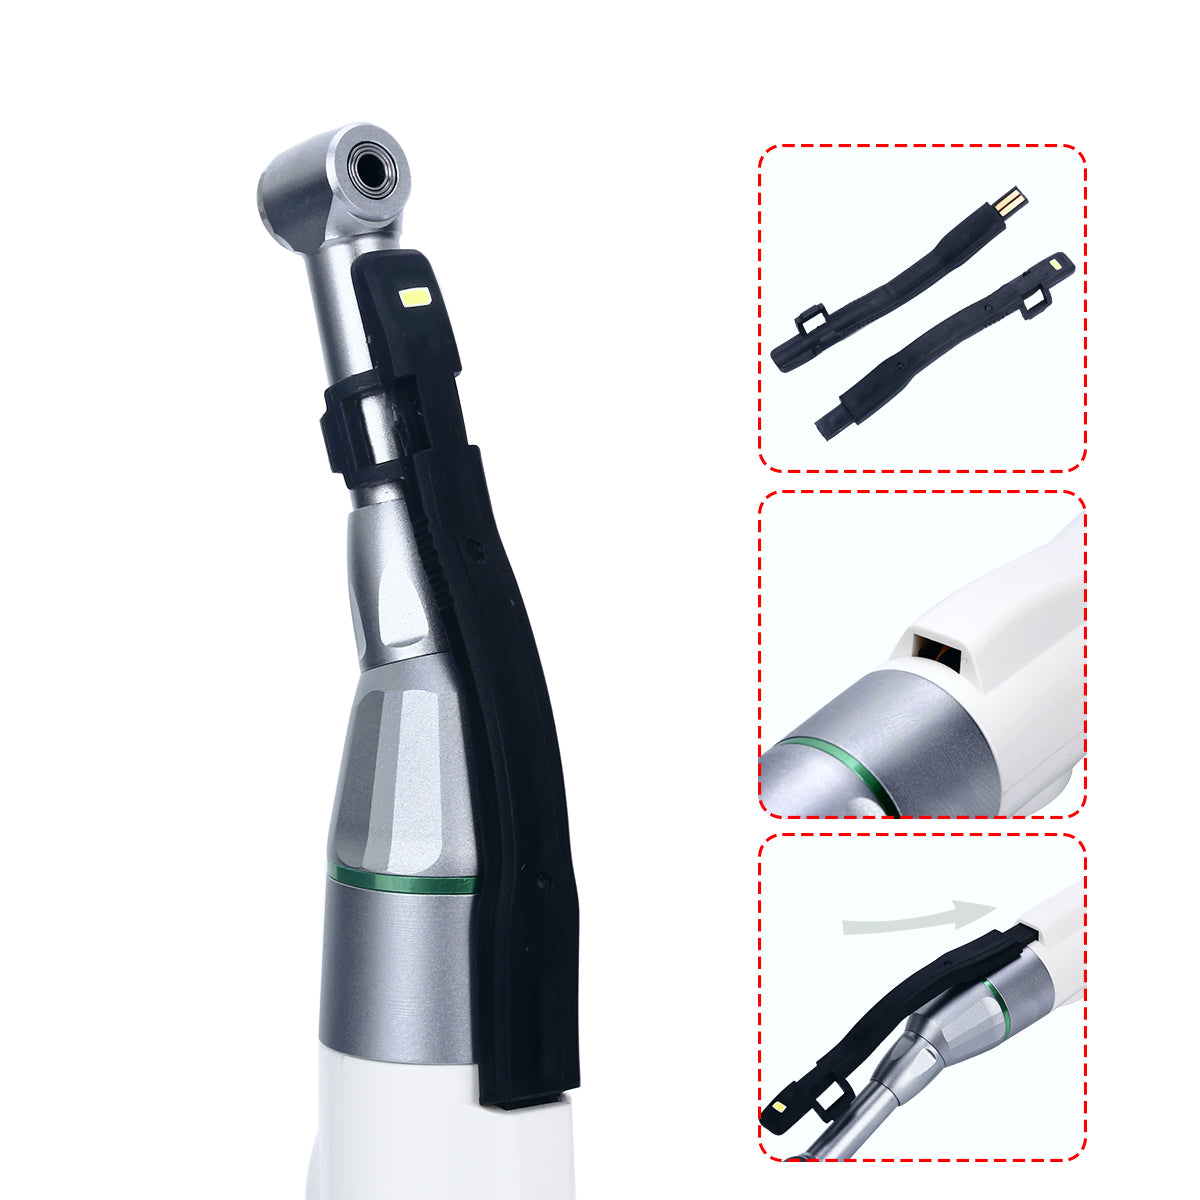 Dental Endo Motor Mini 16:1 Reduction LED Contra Angle + Root Canal Apex Locator